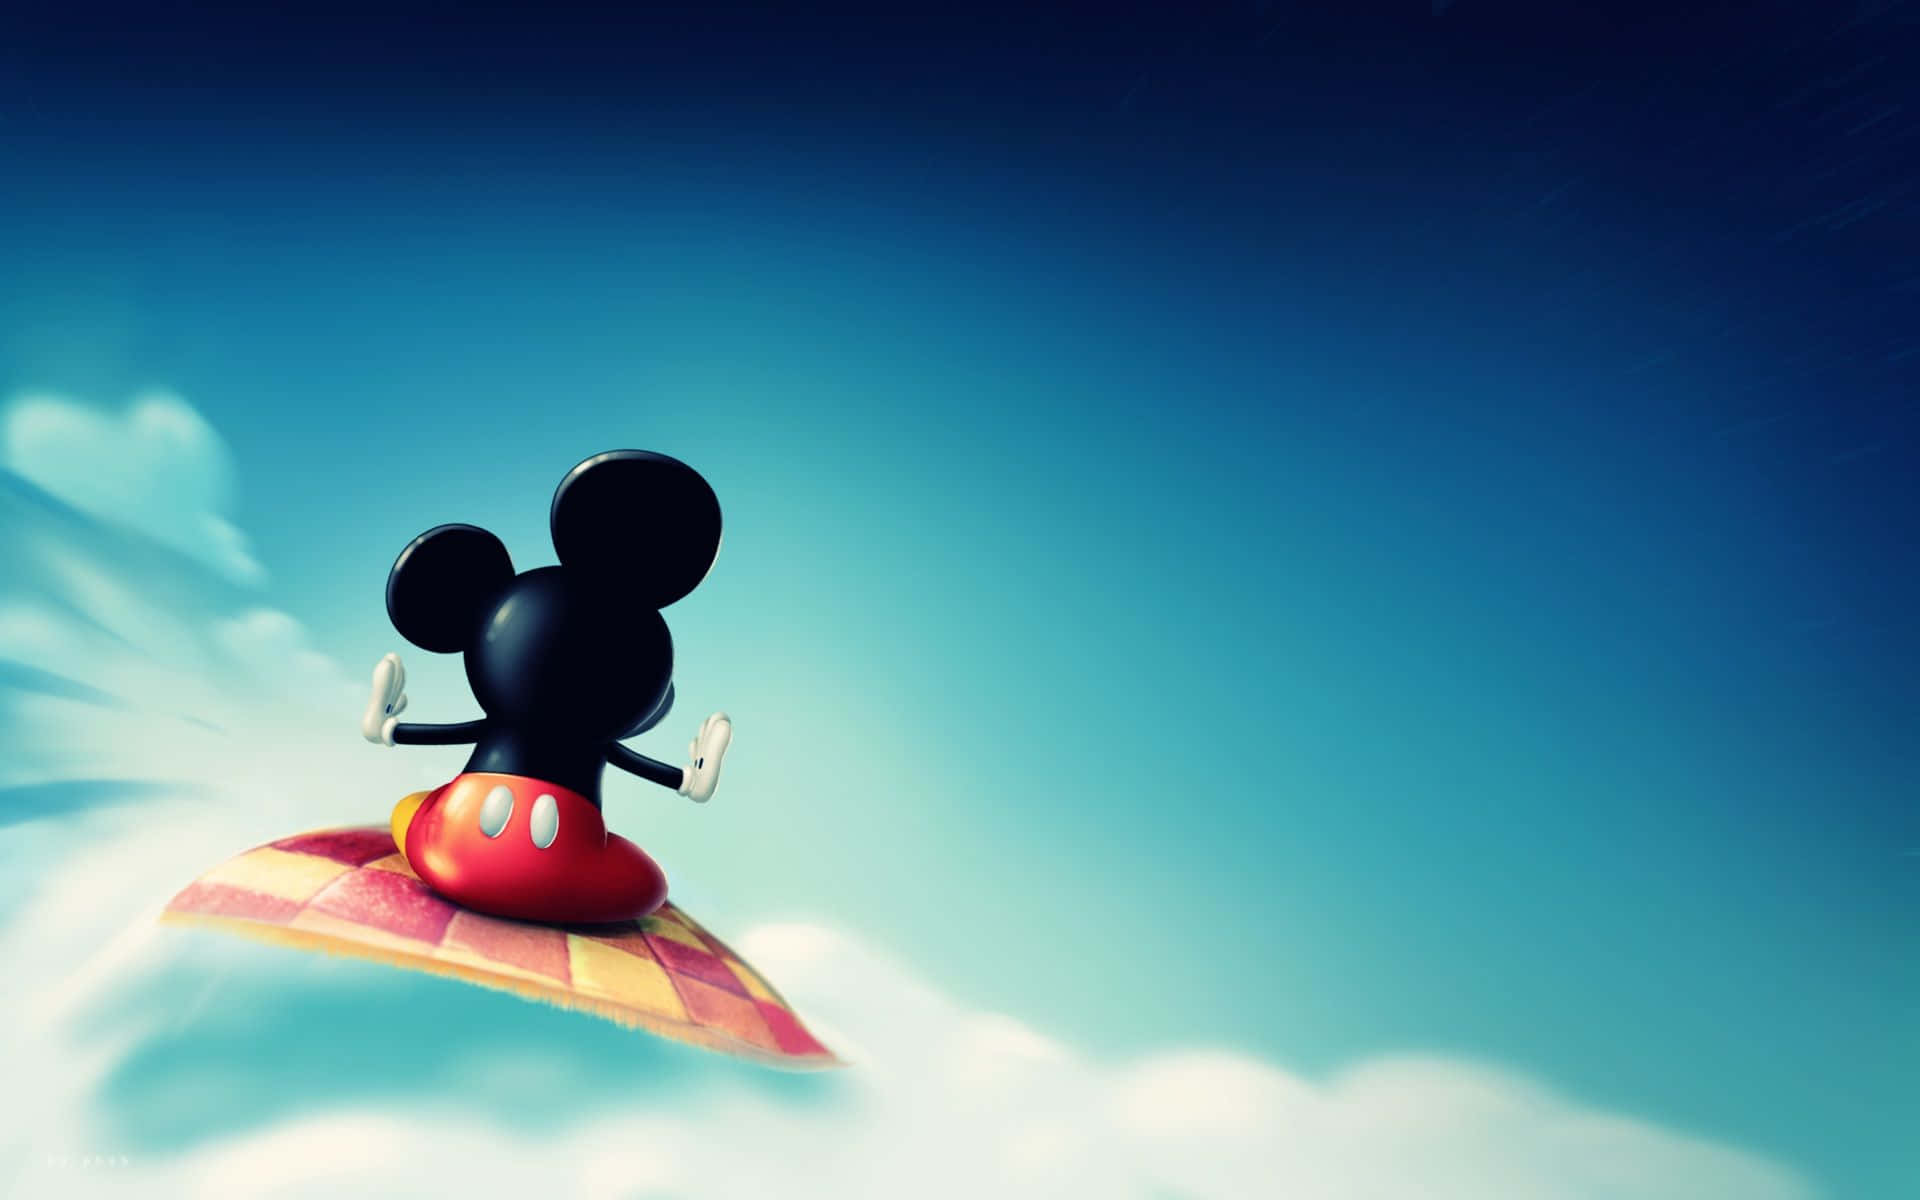 Mickey Mouse Looking As Cute And Cheerful As Ever!